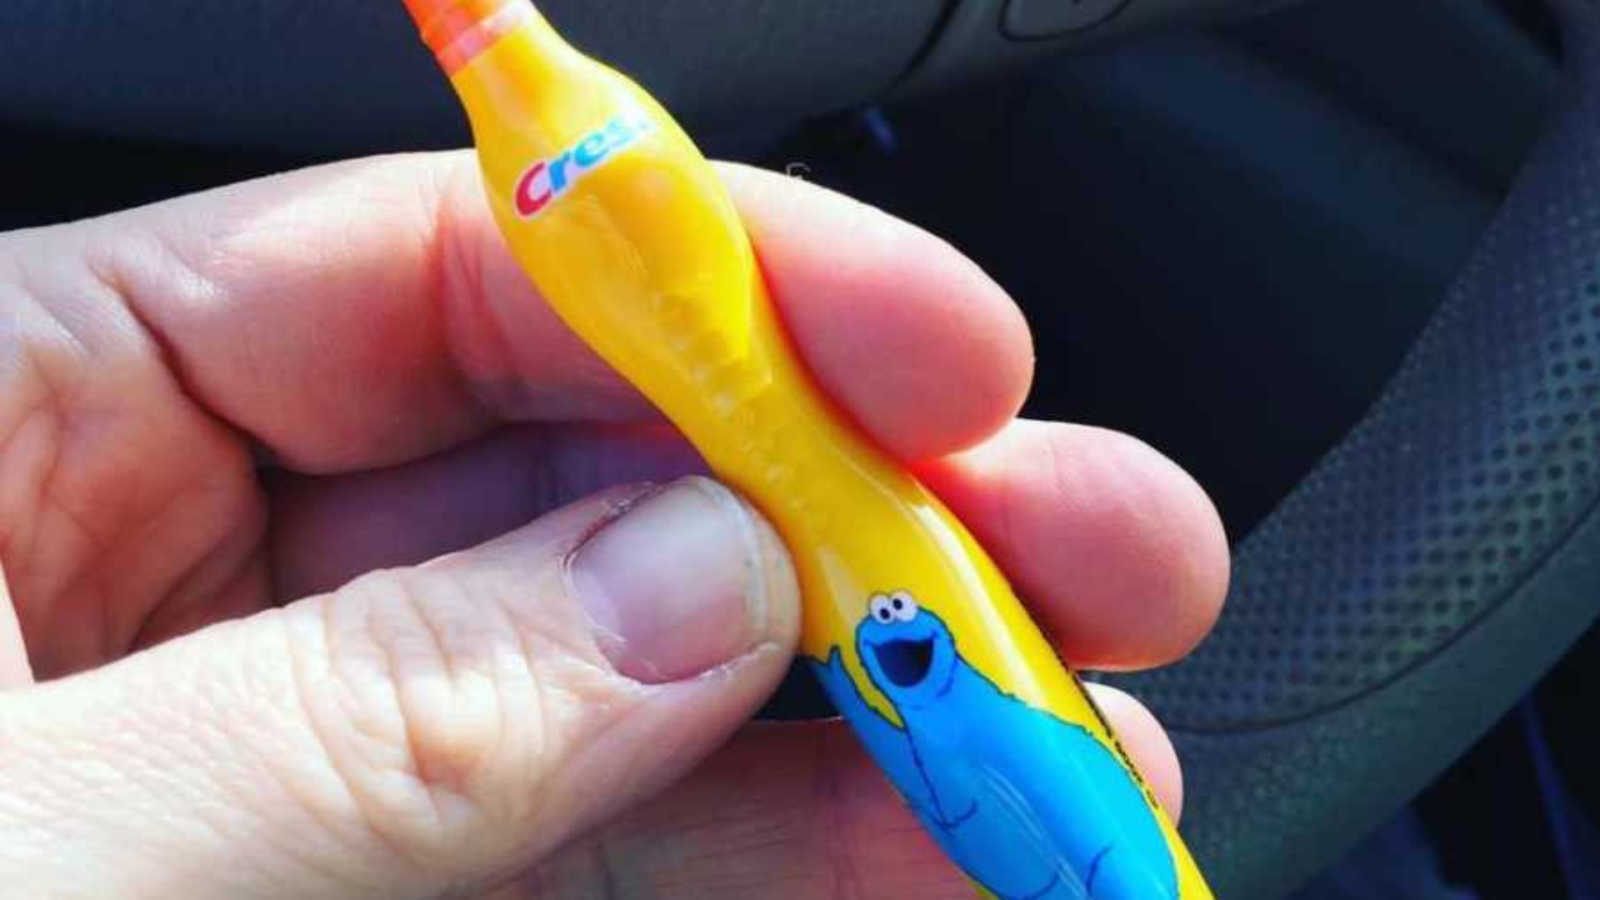 cookie monster toothbrush left by foster child